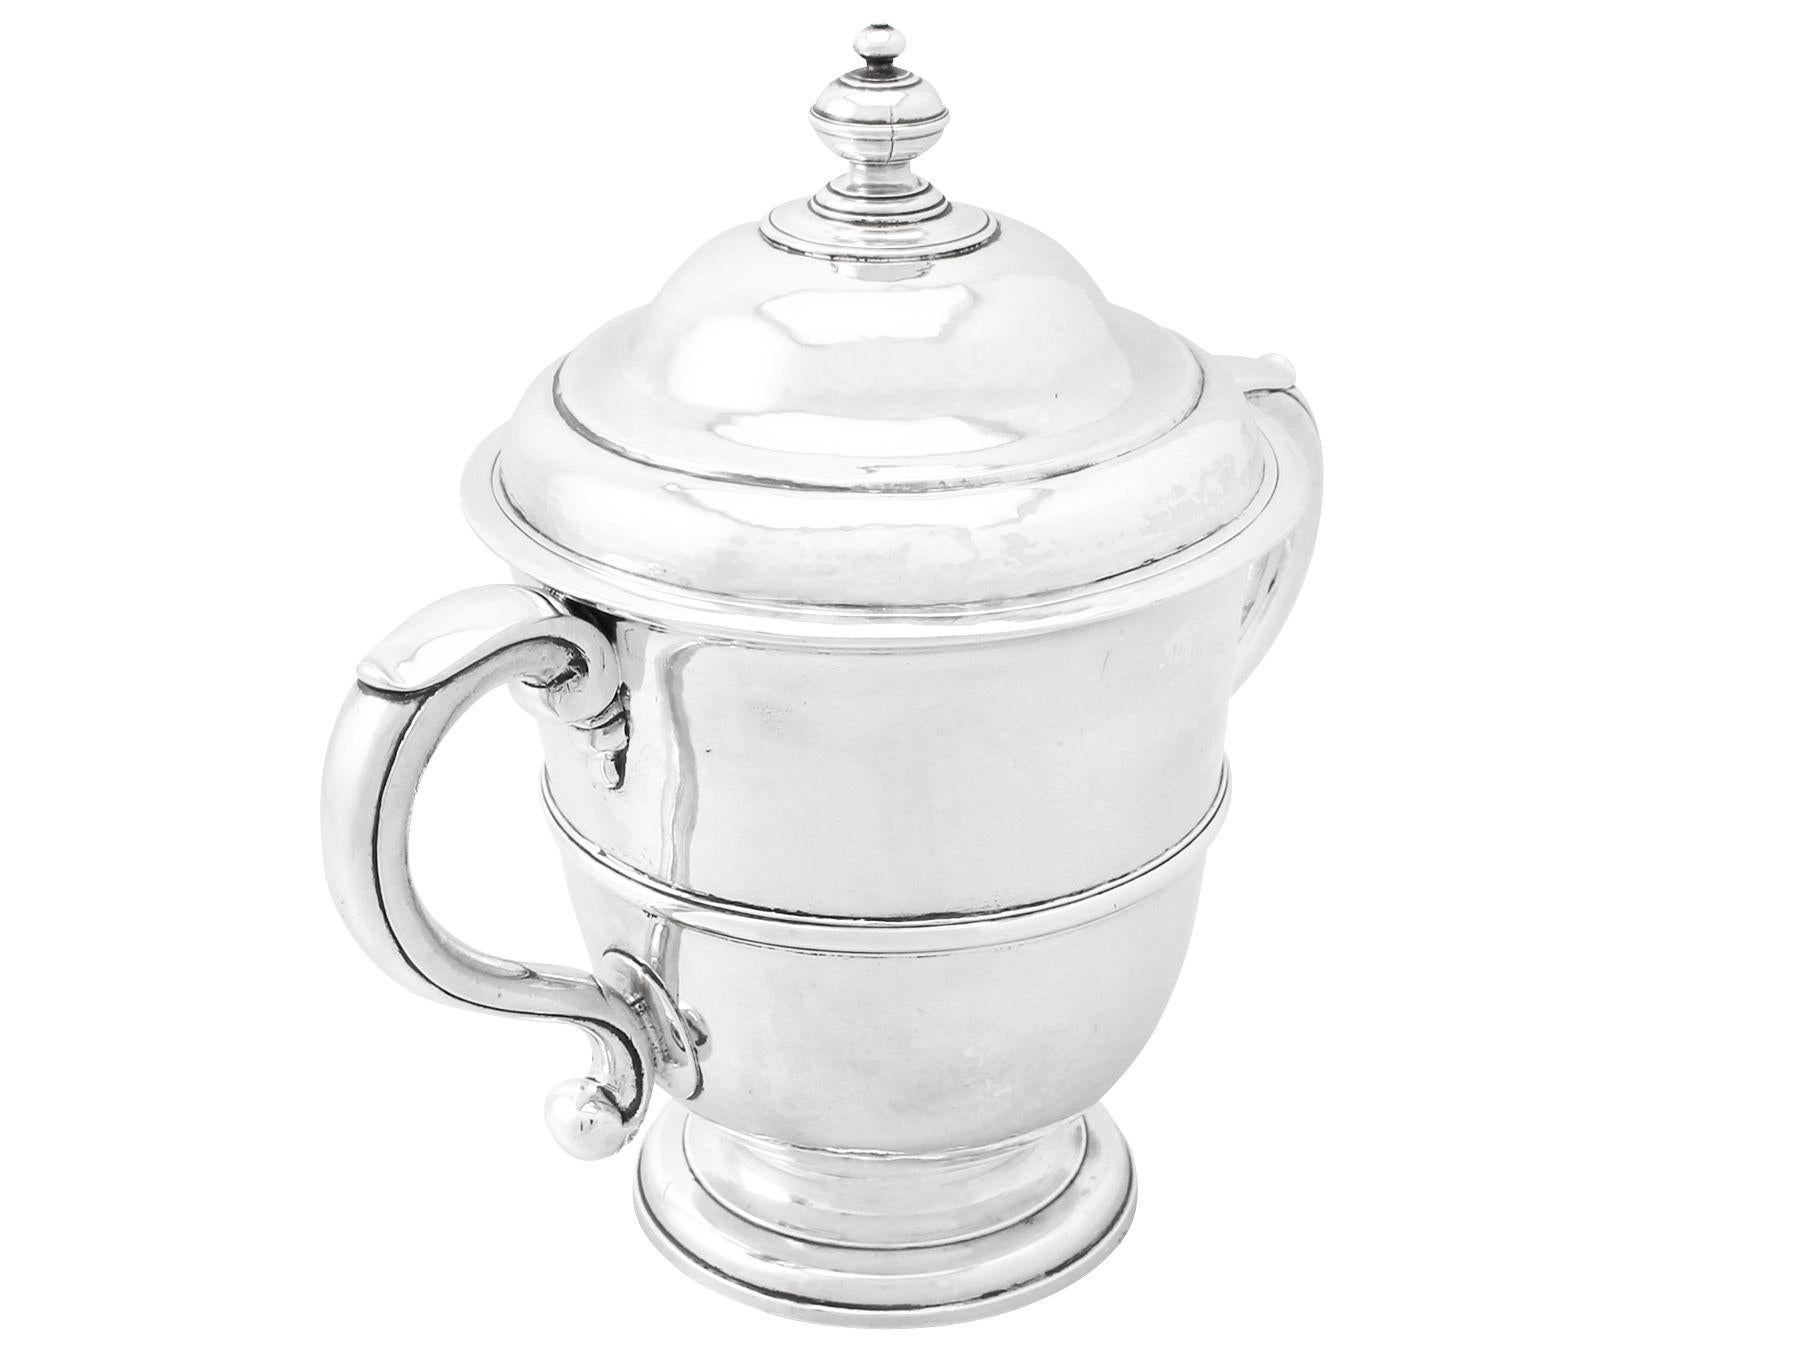 An exceptional, fine and impressive antique William III English Britannia standard silver cup and cover; an addition to our 17th century silverware collection

This fine antique William III Britannia standard* silver cup and cover has a plain bell